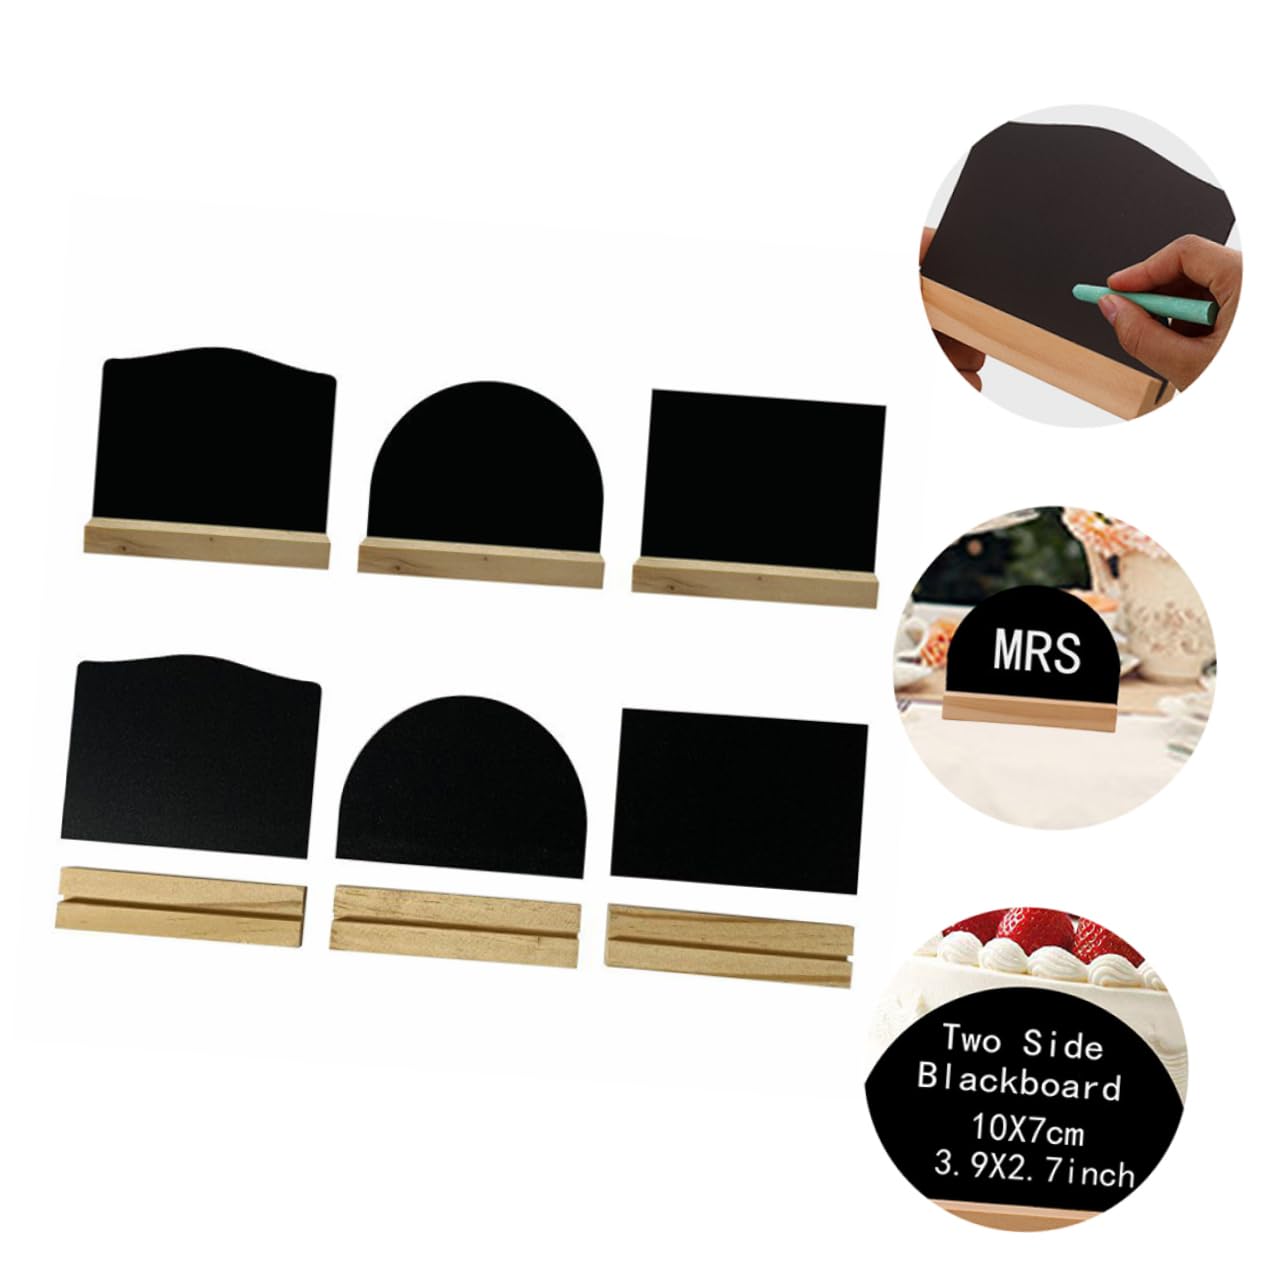 STOBOK 6pcs Message Board Decoration Place Board Signs Small Chalkboard with Stand Small Chalkboard Easel Blackboards Message Board Signs Food Chalkboard Signs Desktop Wooden Menu